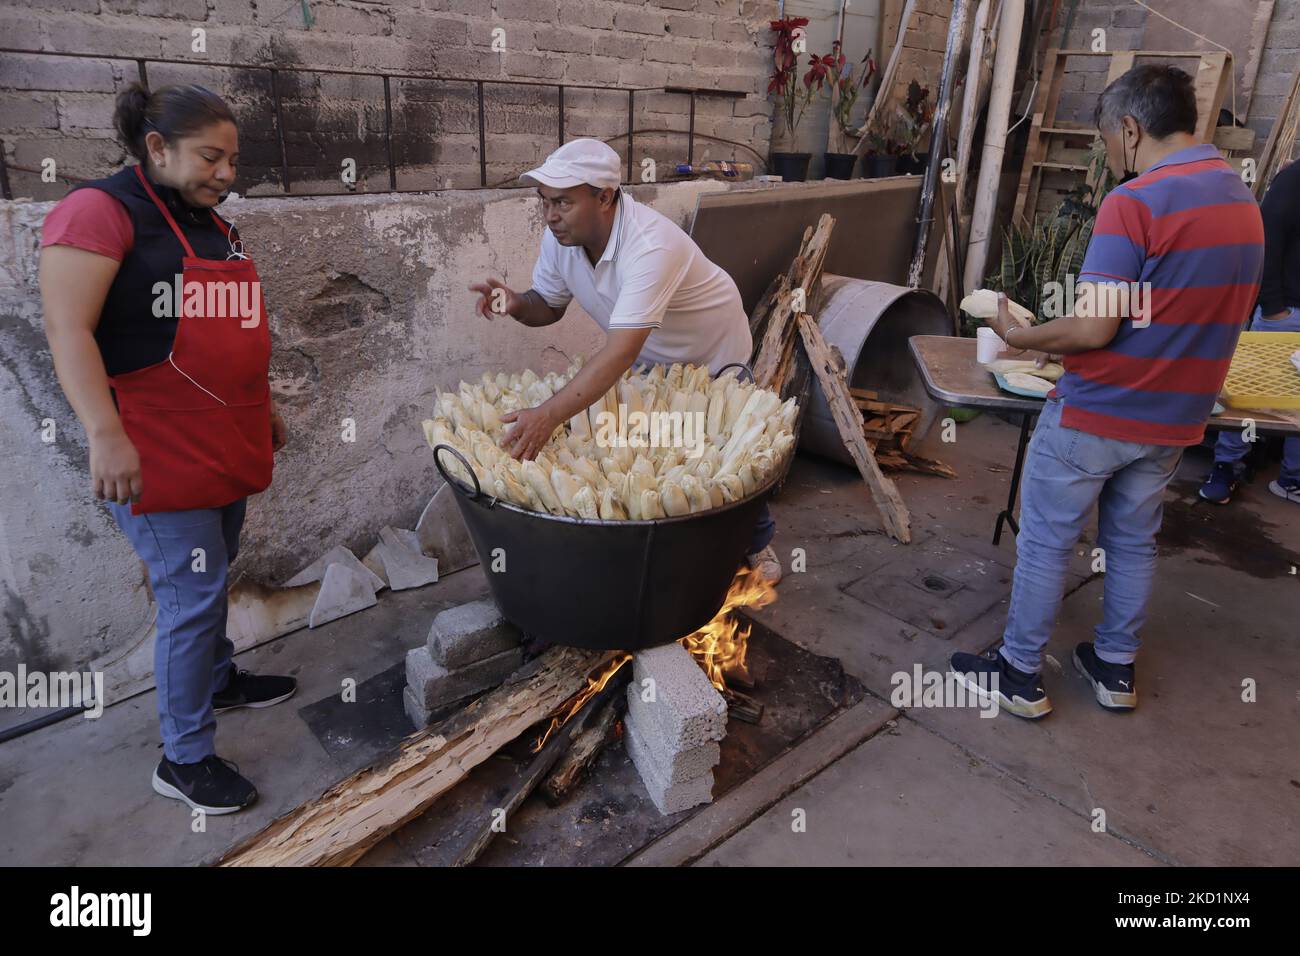 Inhabitants of San Francisco Culhuacán in Mexico City place tamales in a pot to be cooked on the occasion of Candlemas Day, which celebrates the period that closes the cycle of Christmas festivities within the Catholic Church. The tamale (from the Nahuatl tamalli, which means wrapped) is a Mexican food made from corn, filled with various ingredients, cooked in a bundle of vegetable leaves that can be made of corn, plantain, reed, chilaca or papatla. (Photo by Gerardo Vieyra/NurPhoto) Stock Photo